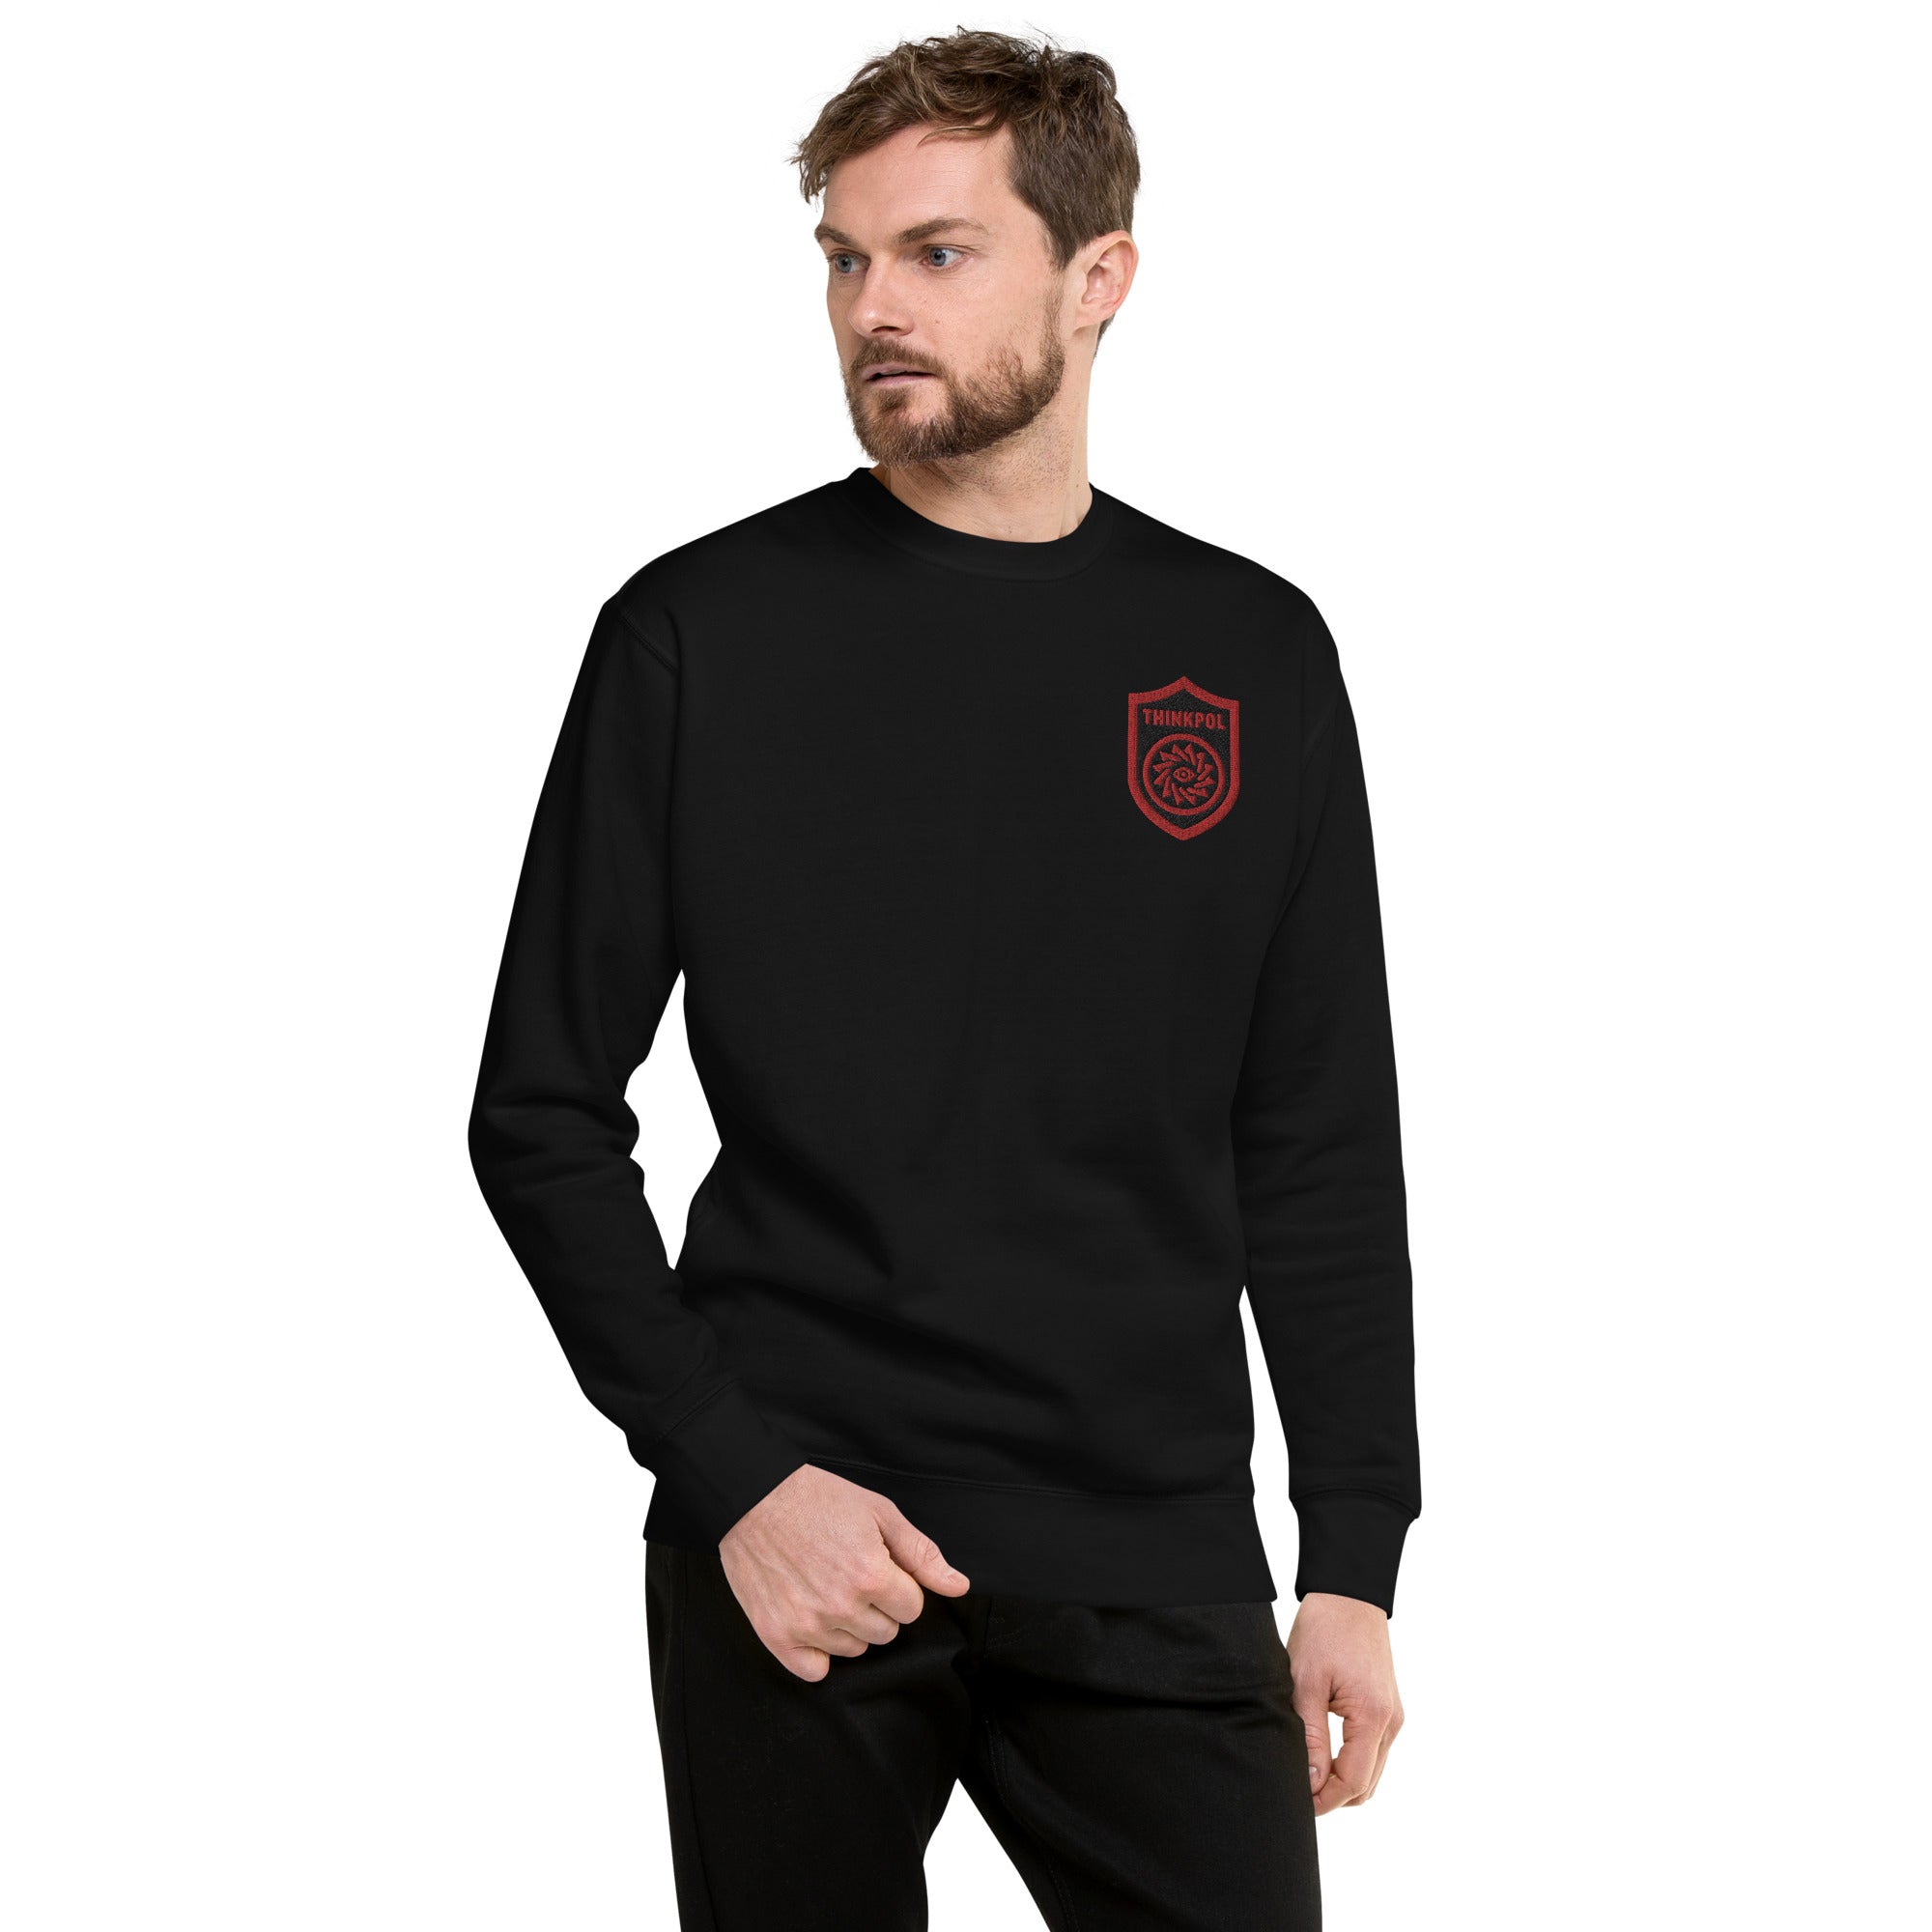 Thought Police Embroidered Sweatshirt